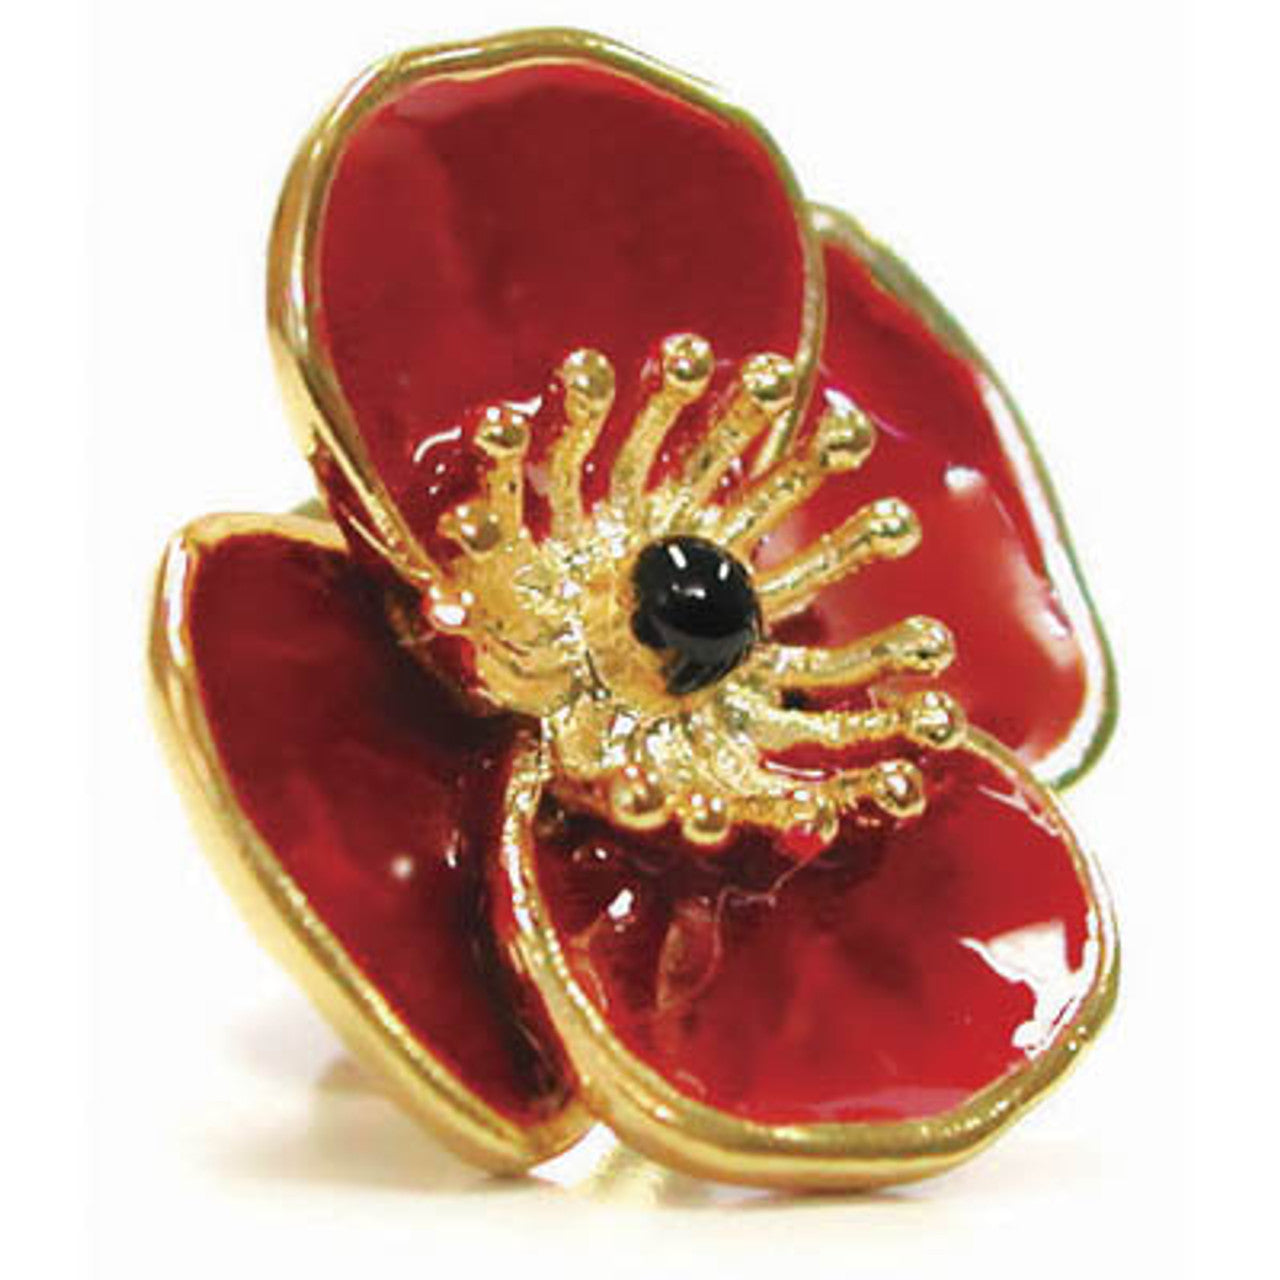 The stunning 3D Poppy Badge On Card is a must-have accessory from the military specialists. This impressive dimensional poppy metal badge is not only beautiful, but also perfectly crafted to leave you stunned. With its intricate design and meticulous attention to detail, this 15mm poppy is a true work of art. www.defenceqstore.com.au